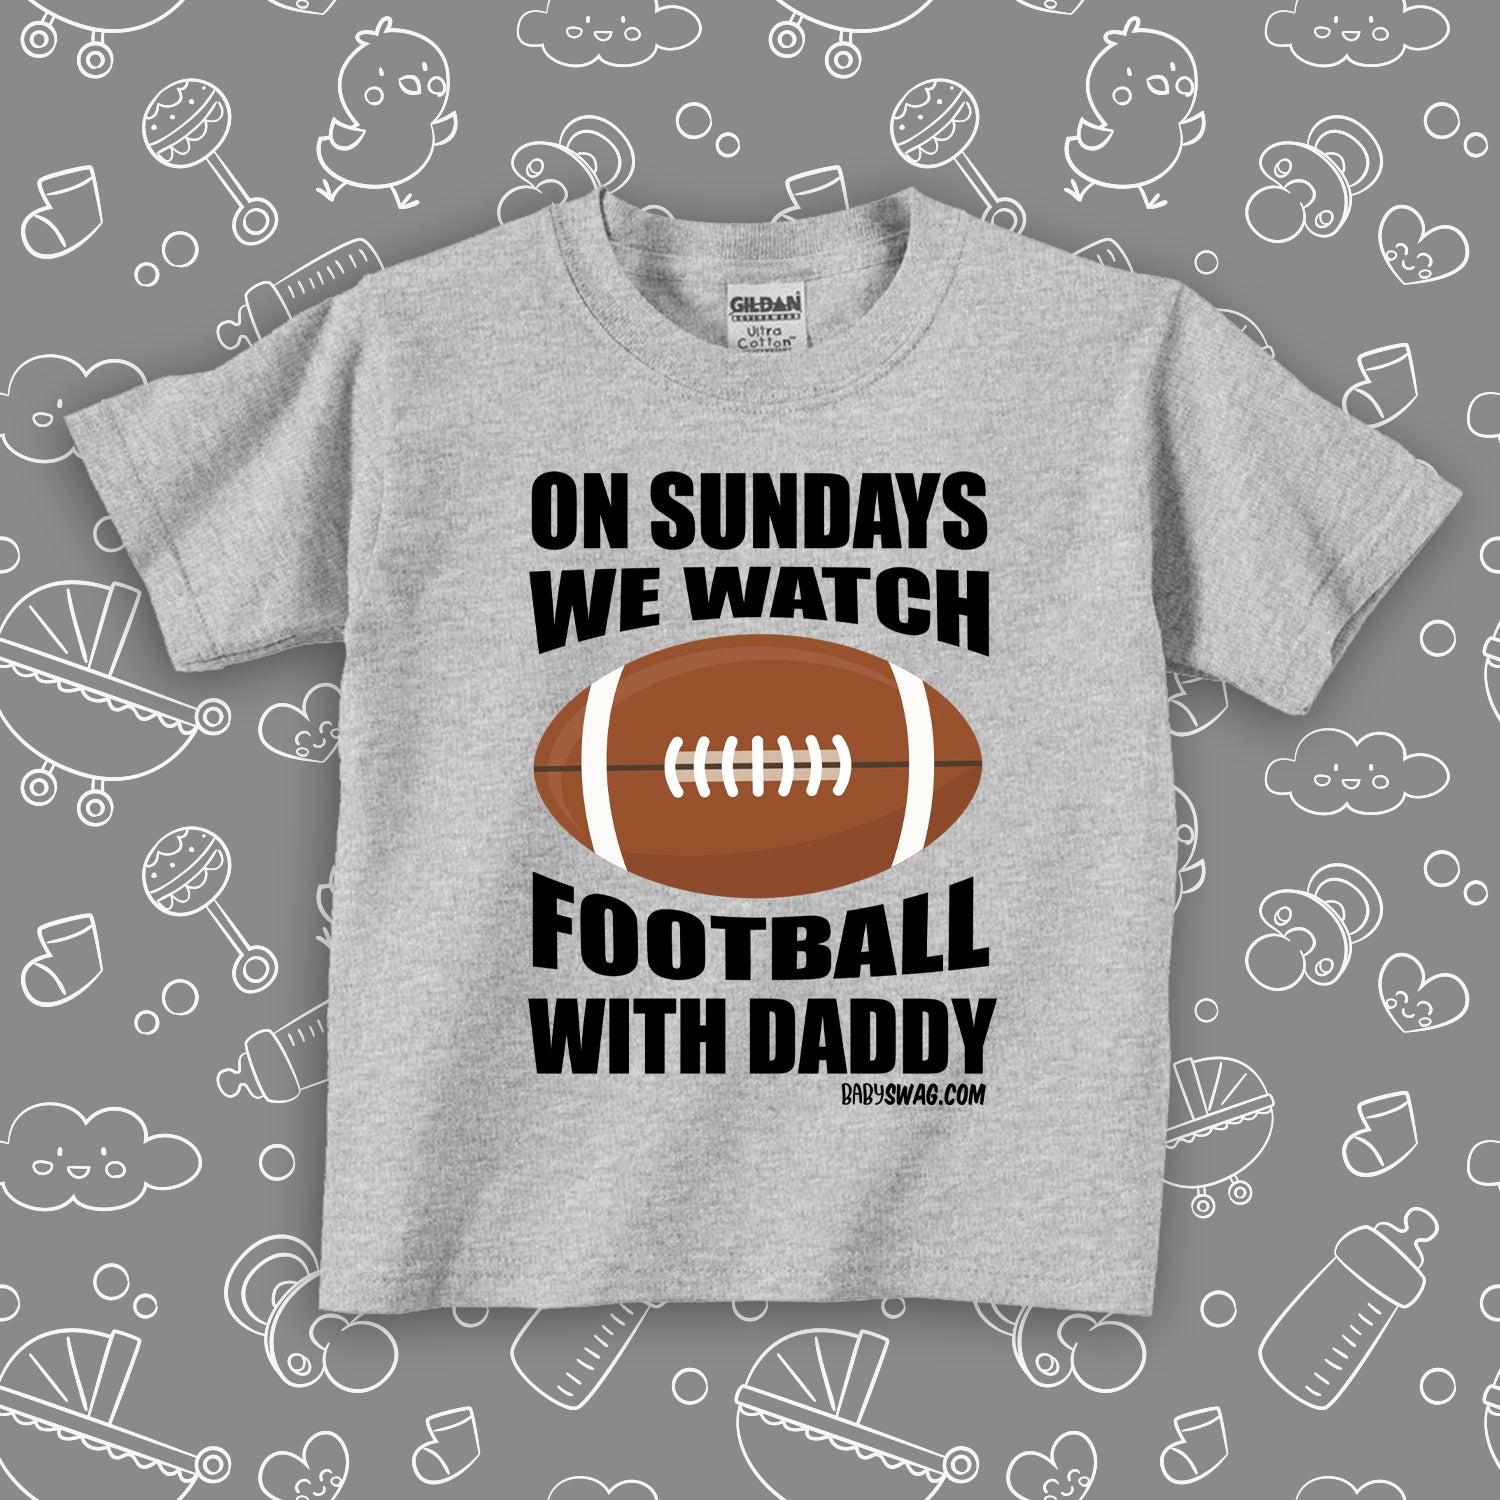  The "On Sunday We Watch Football With Daddy" toddler boy shirt in grey. 